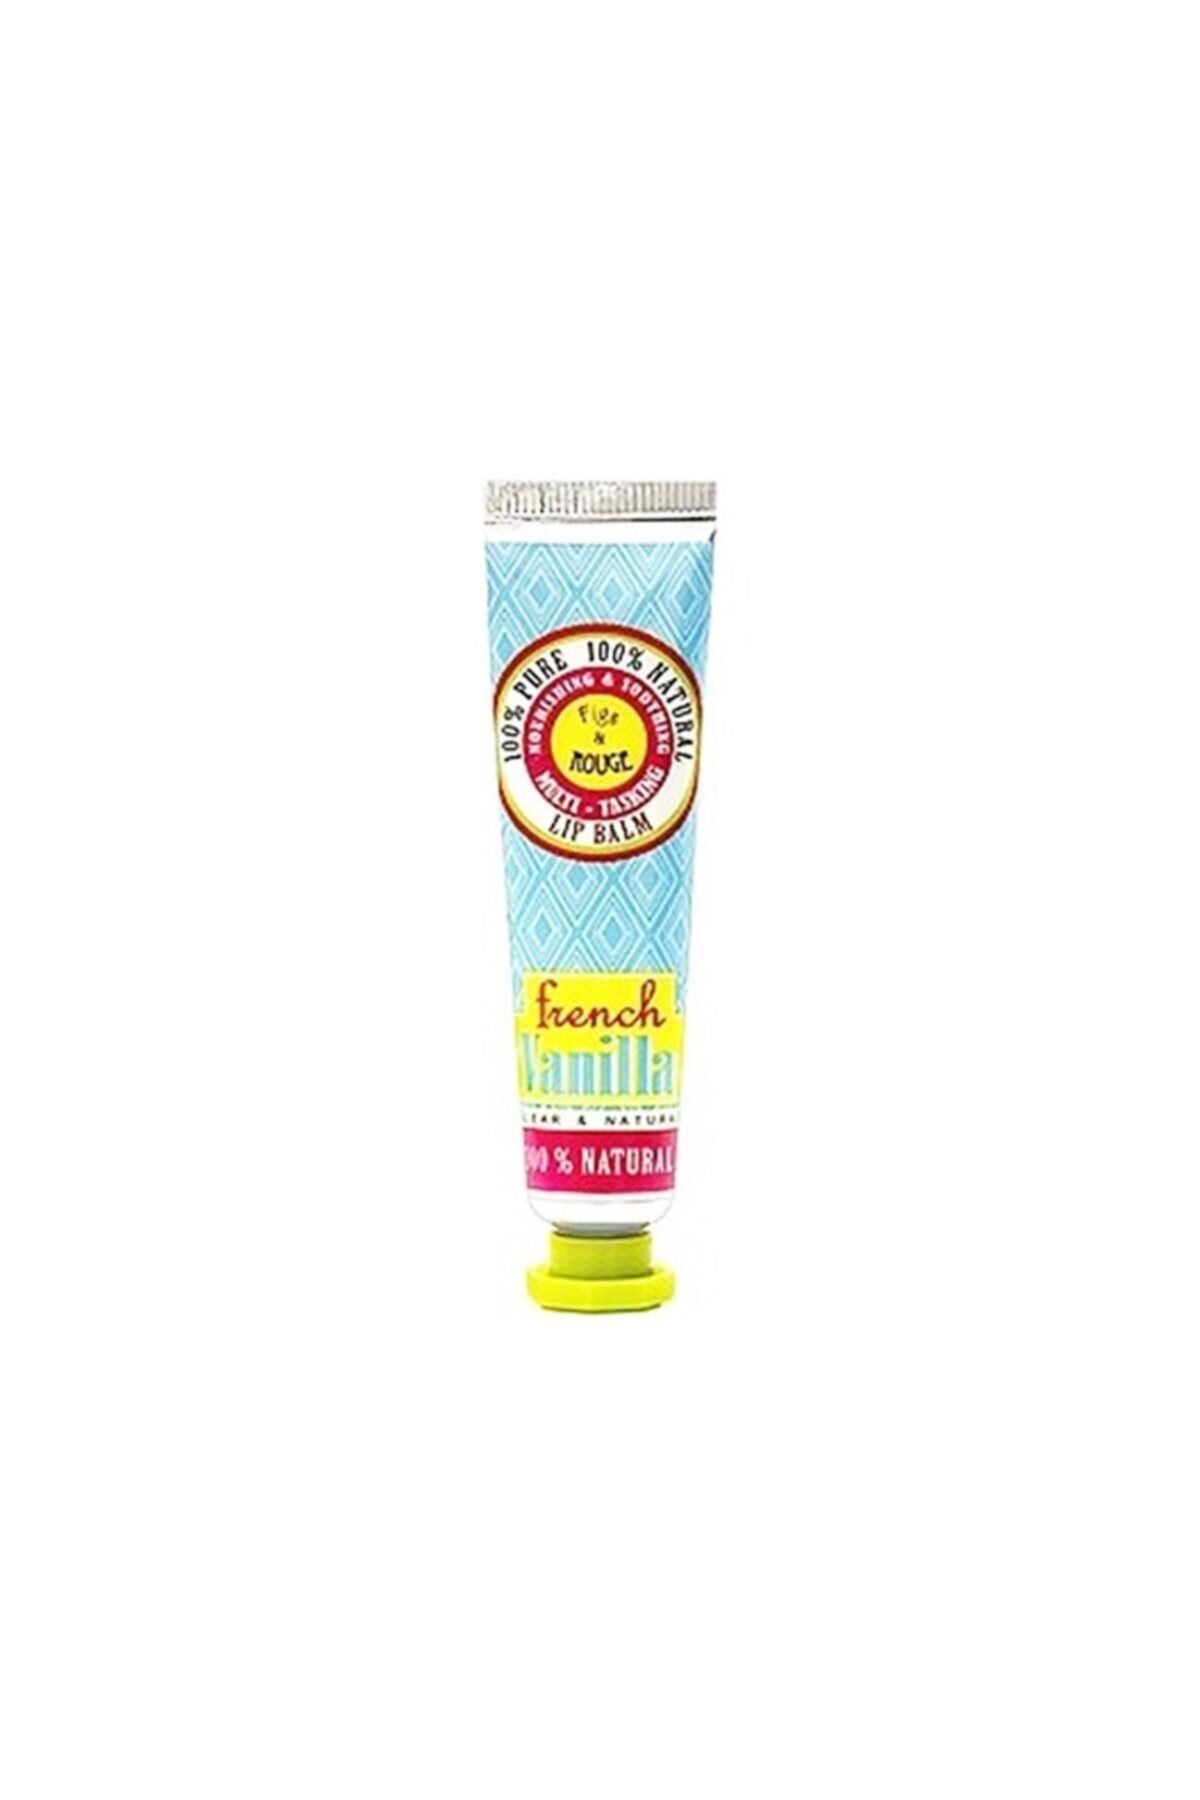 Fing'rs Prints Figs Rouge French Vanilla Lip Balm